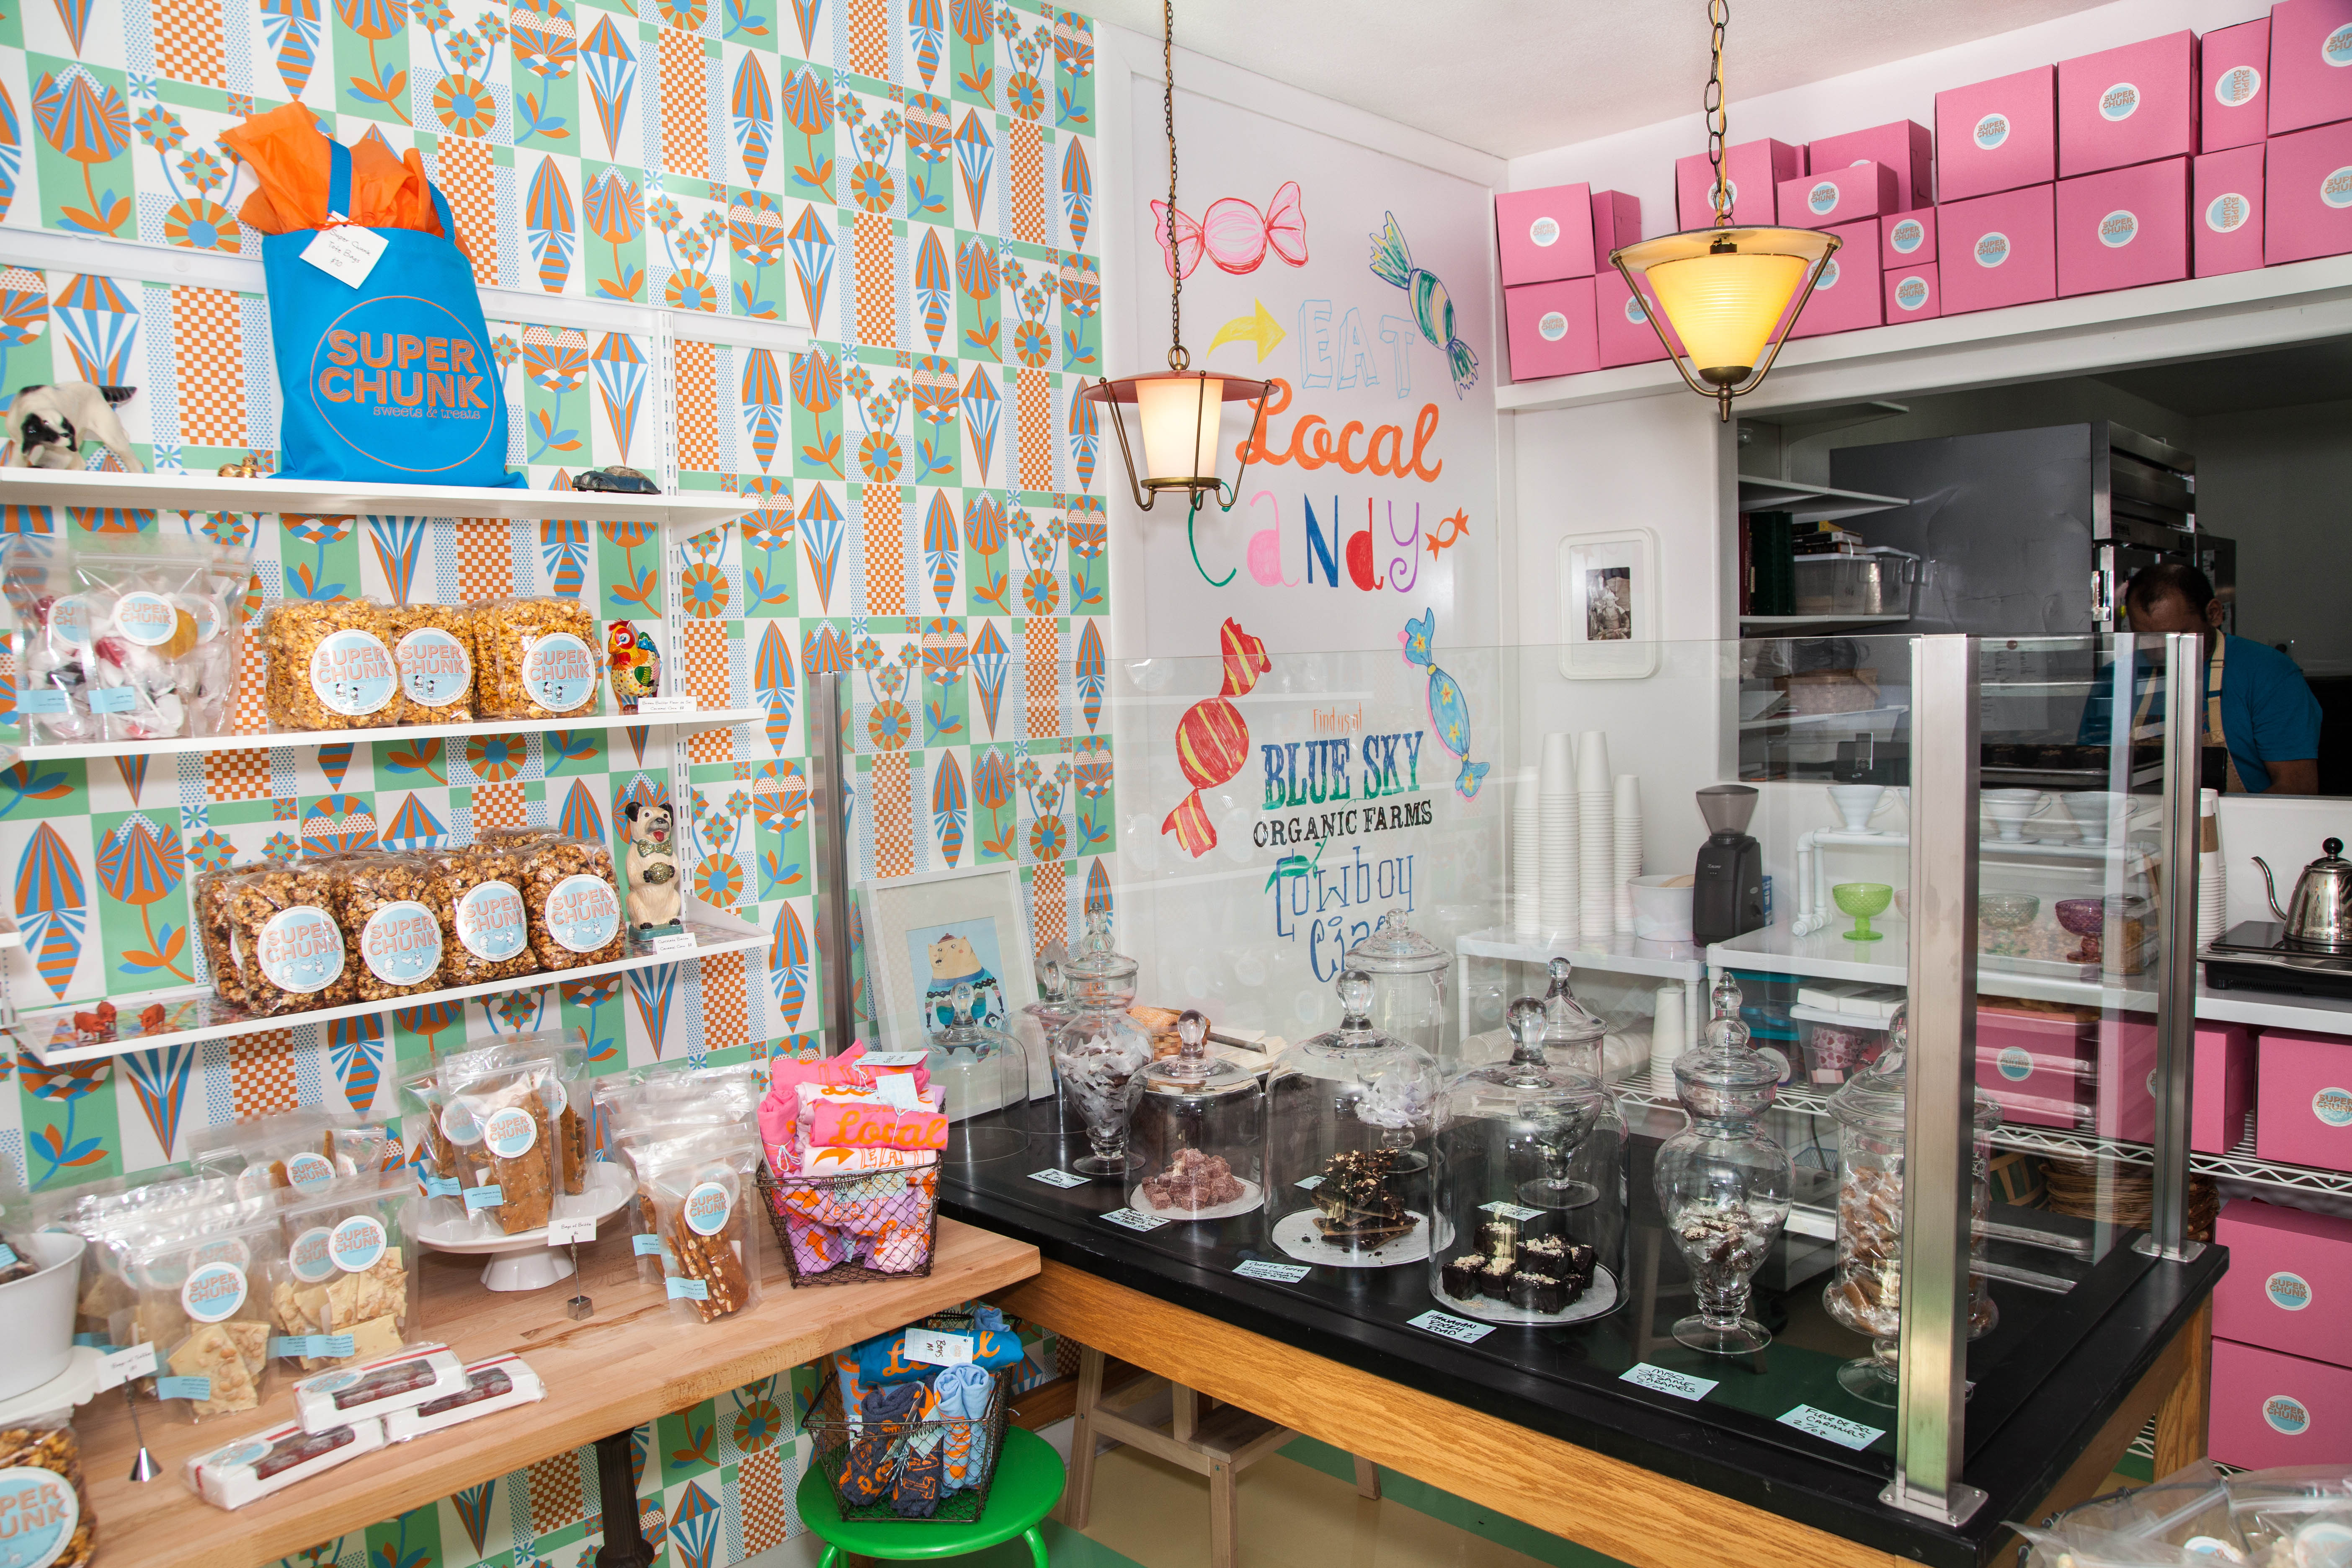 Quirky decor at Super Chunk Sweets